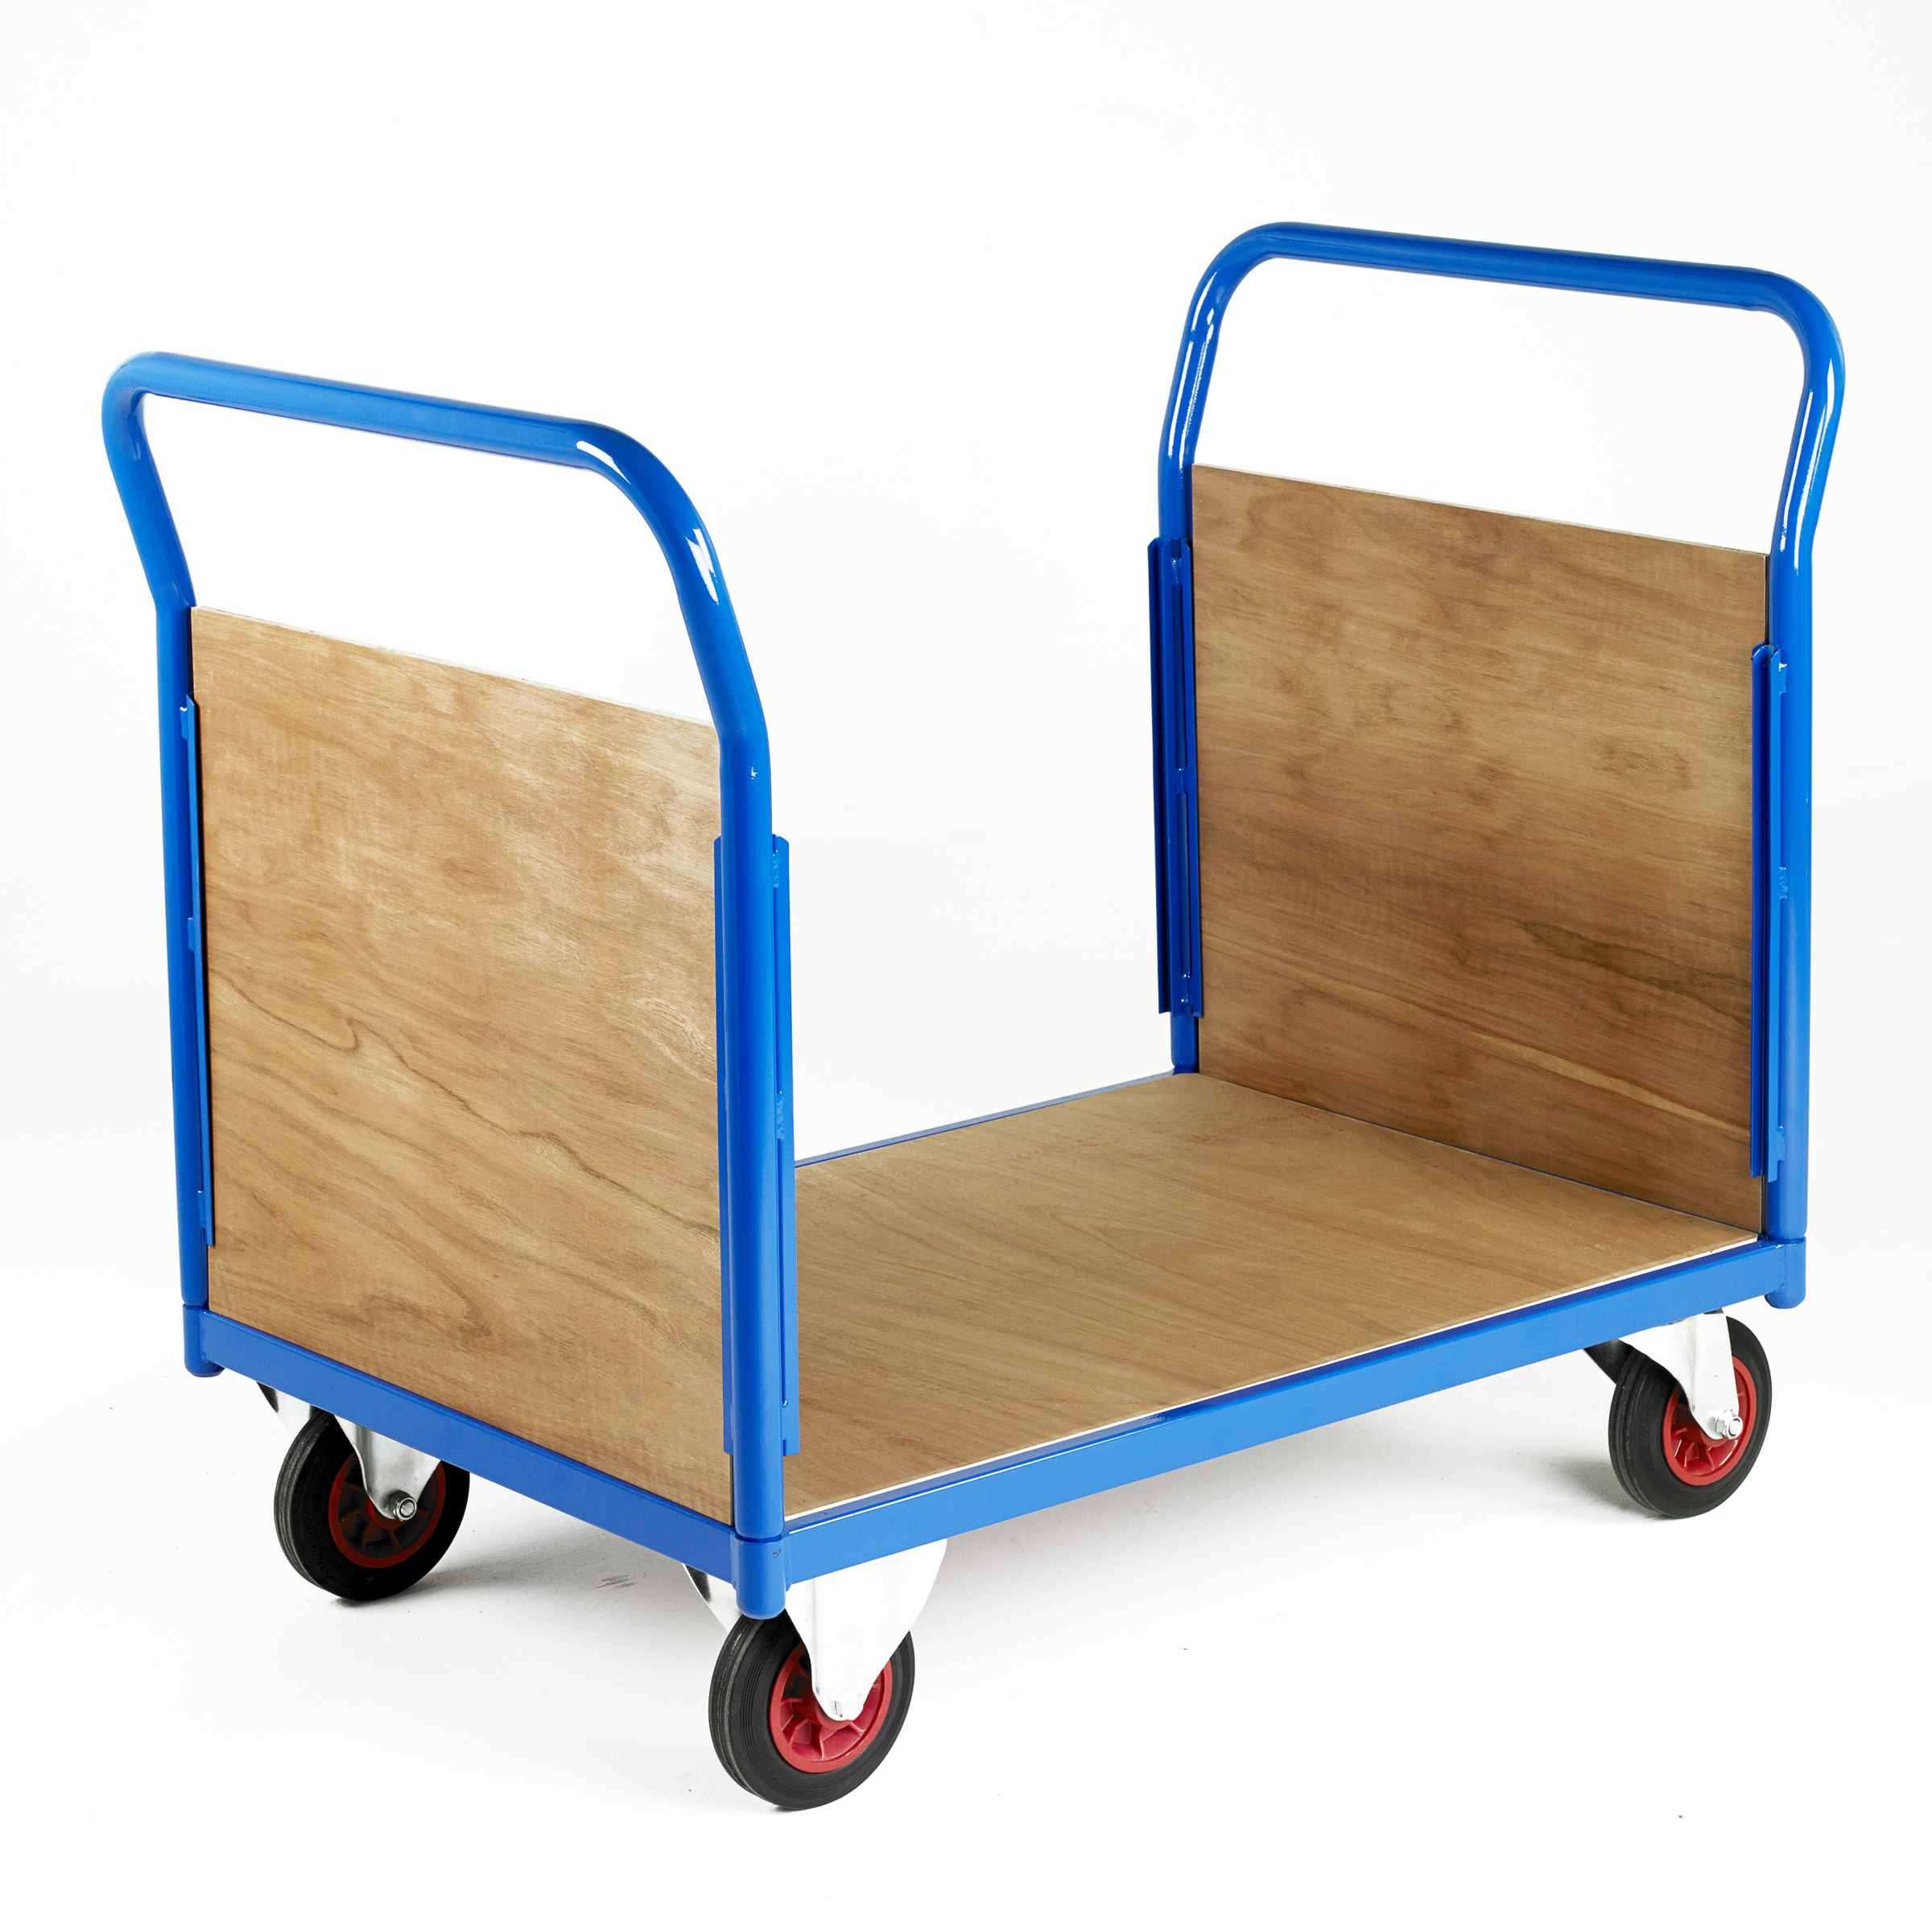 Platform Truck - 500 Series with Timber Panels